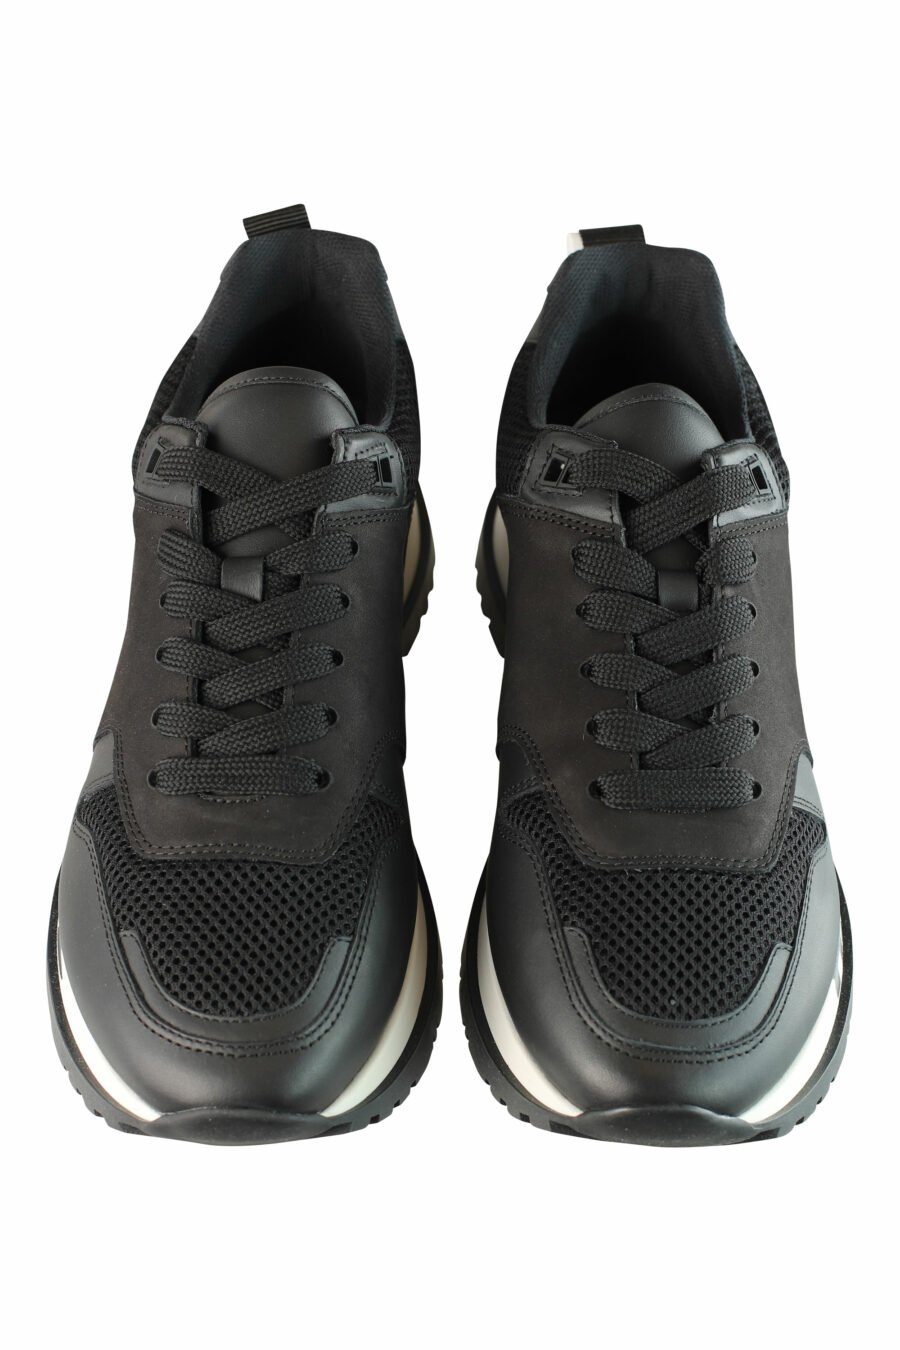 Black running shoes with white sole and black logo - IMG 1361